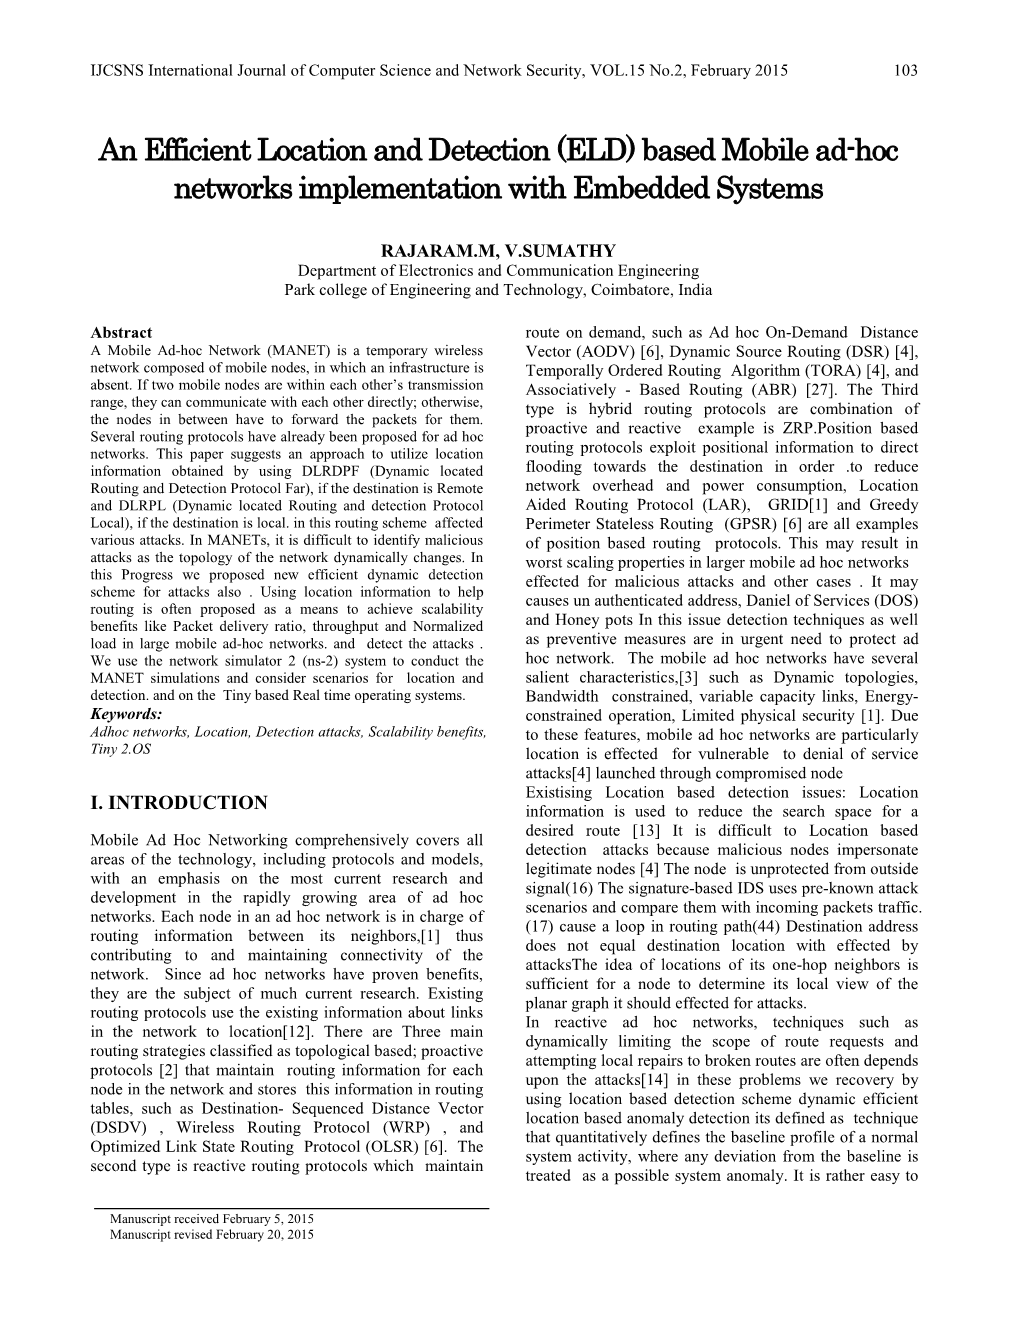 Based Mobile Ad-Hoc Networks Implementation with Embedded Systems